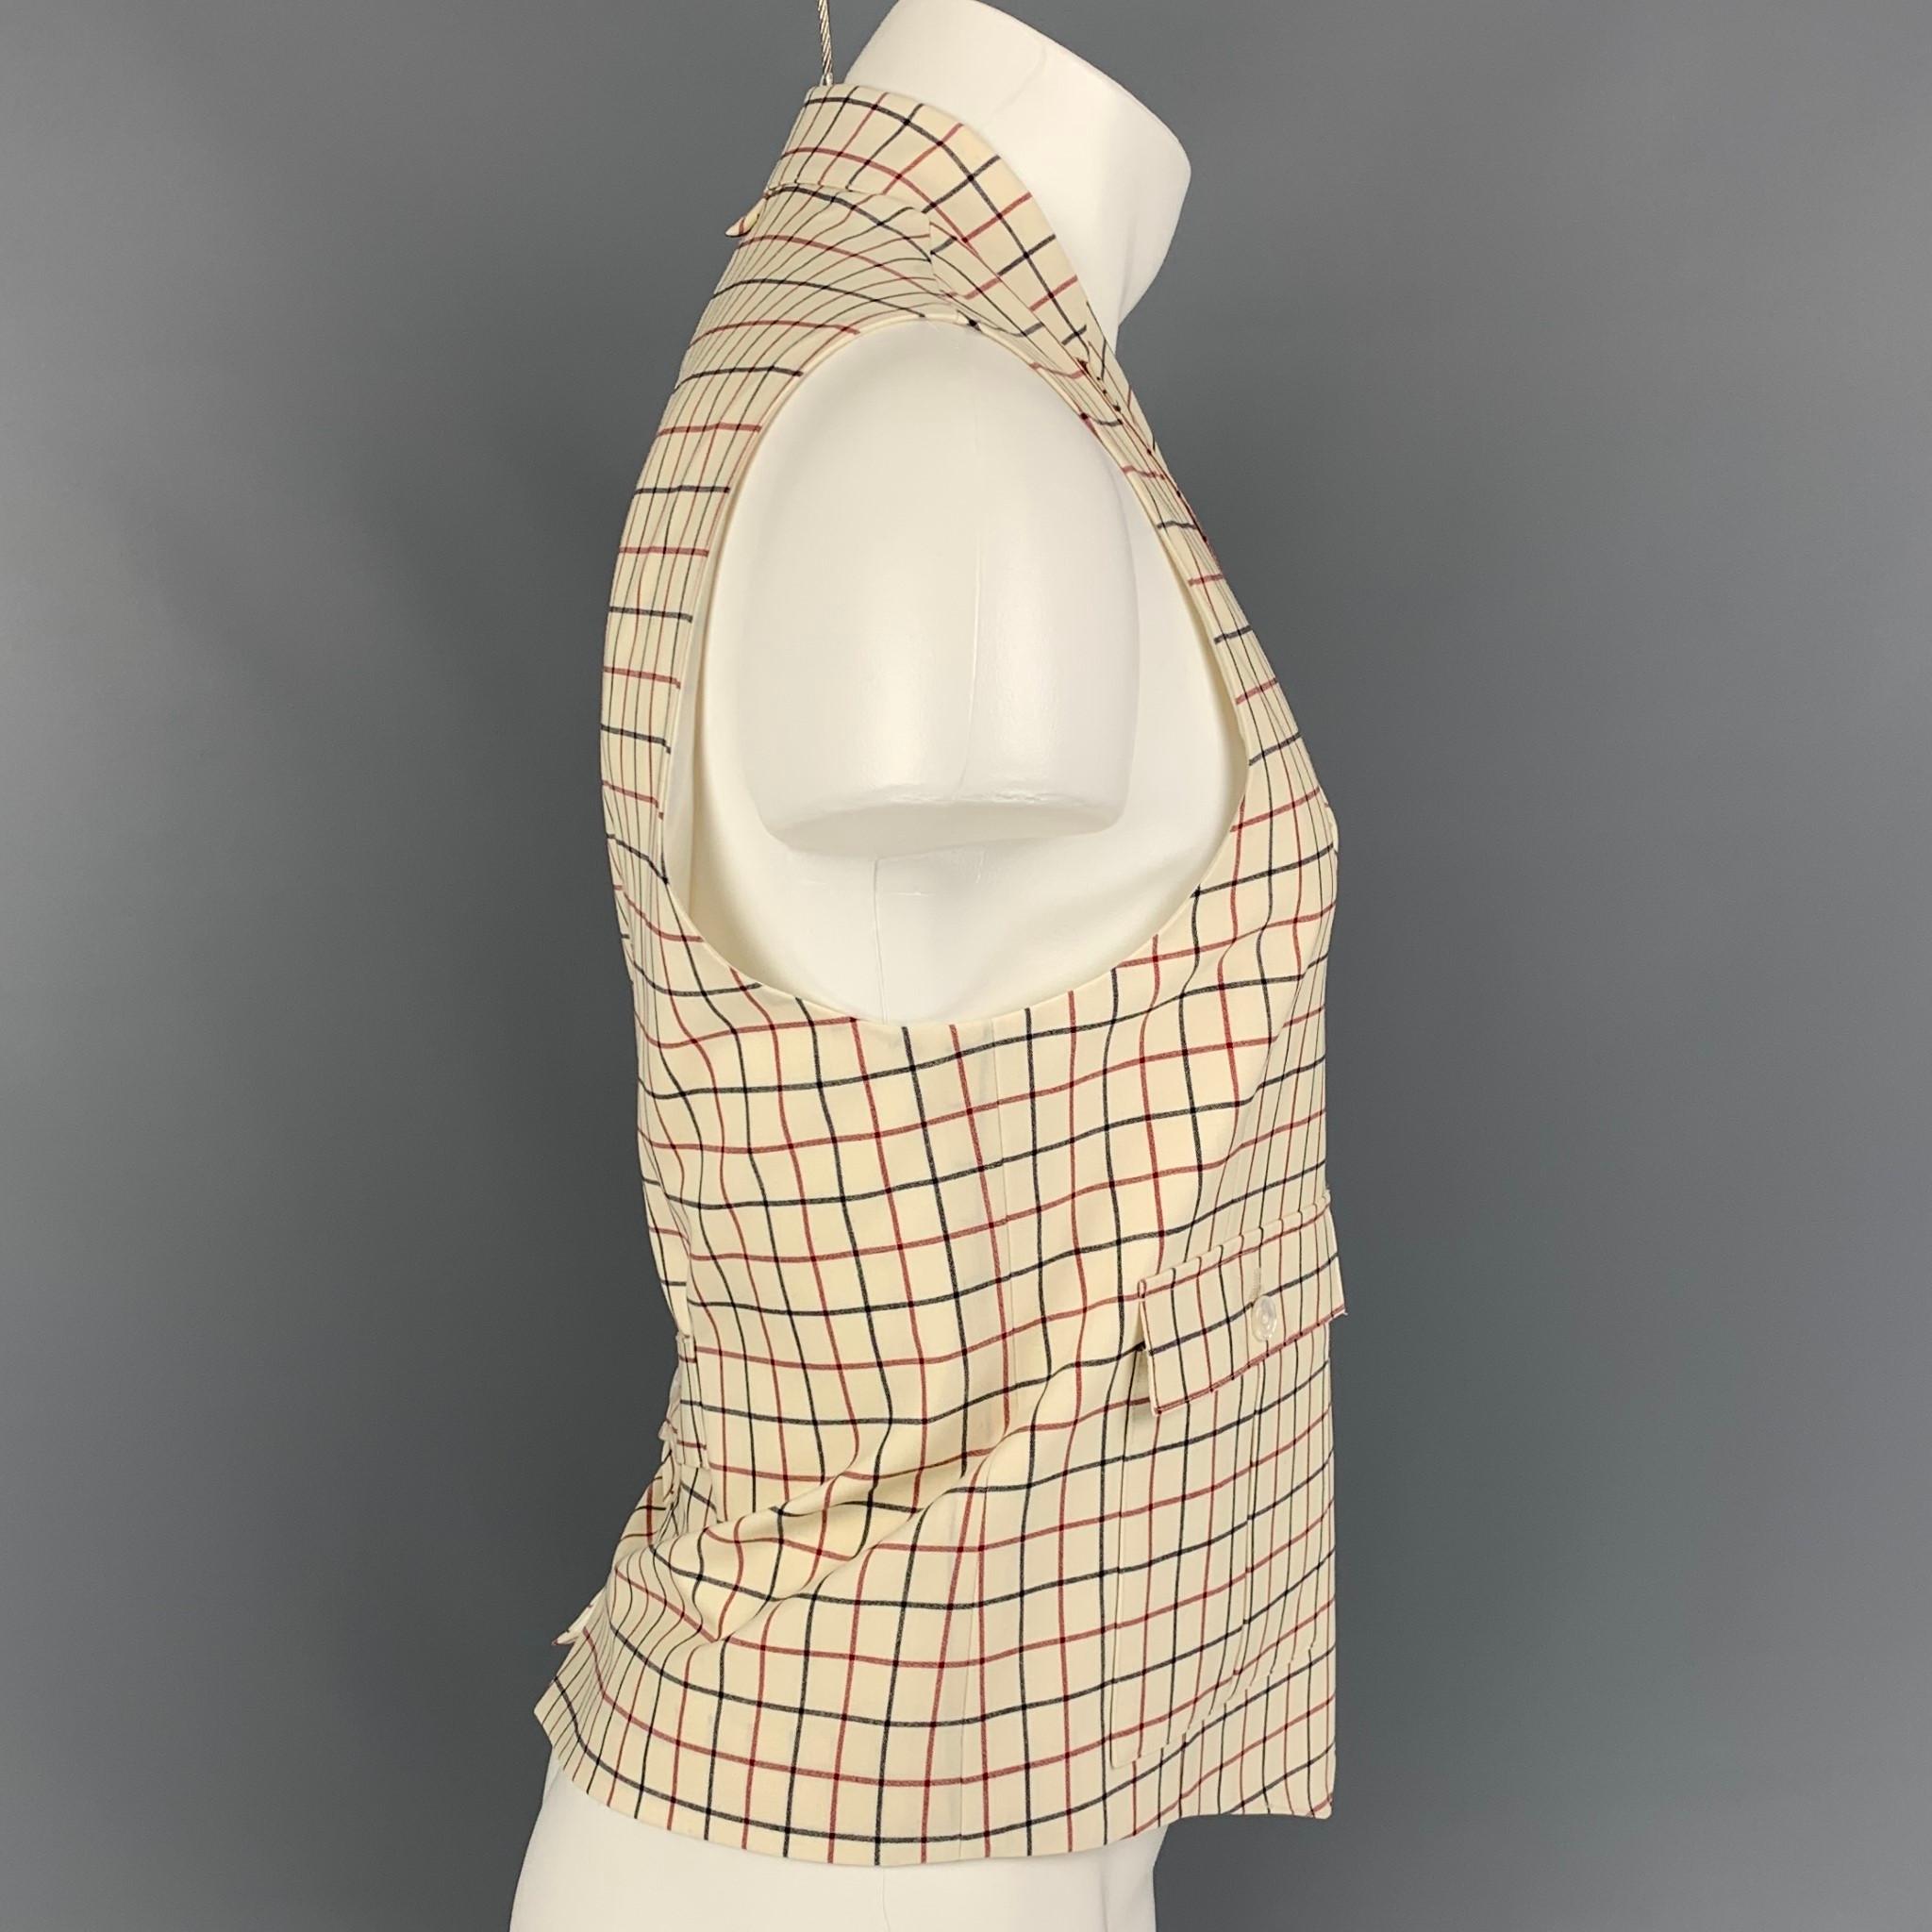 BLACK FLEECE vest comes in a beige & navy window pane wool featuring a notch lapel, back belt, patch pockets, and a buttoned closure. 

New With Tags. 
Marked: BB2

Measurements:

Shoulder: 15 in.
Chest: 42 in.
Length: 23 in. 